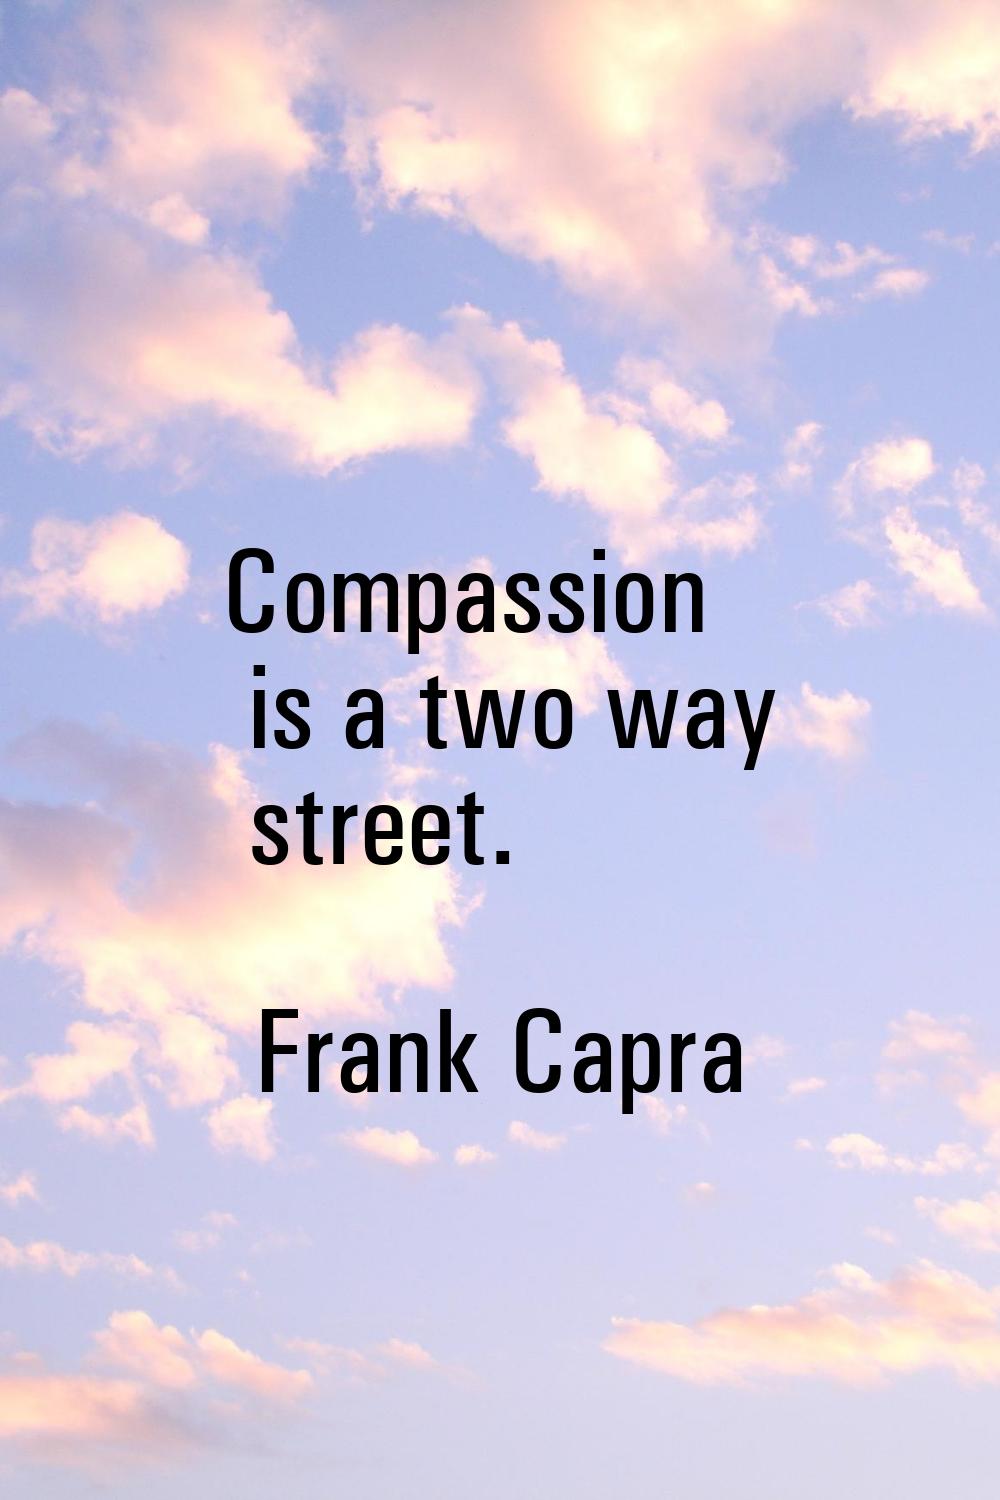 Compassion is a two way street.